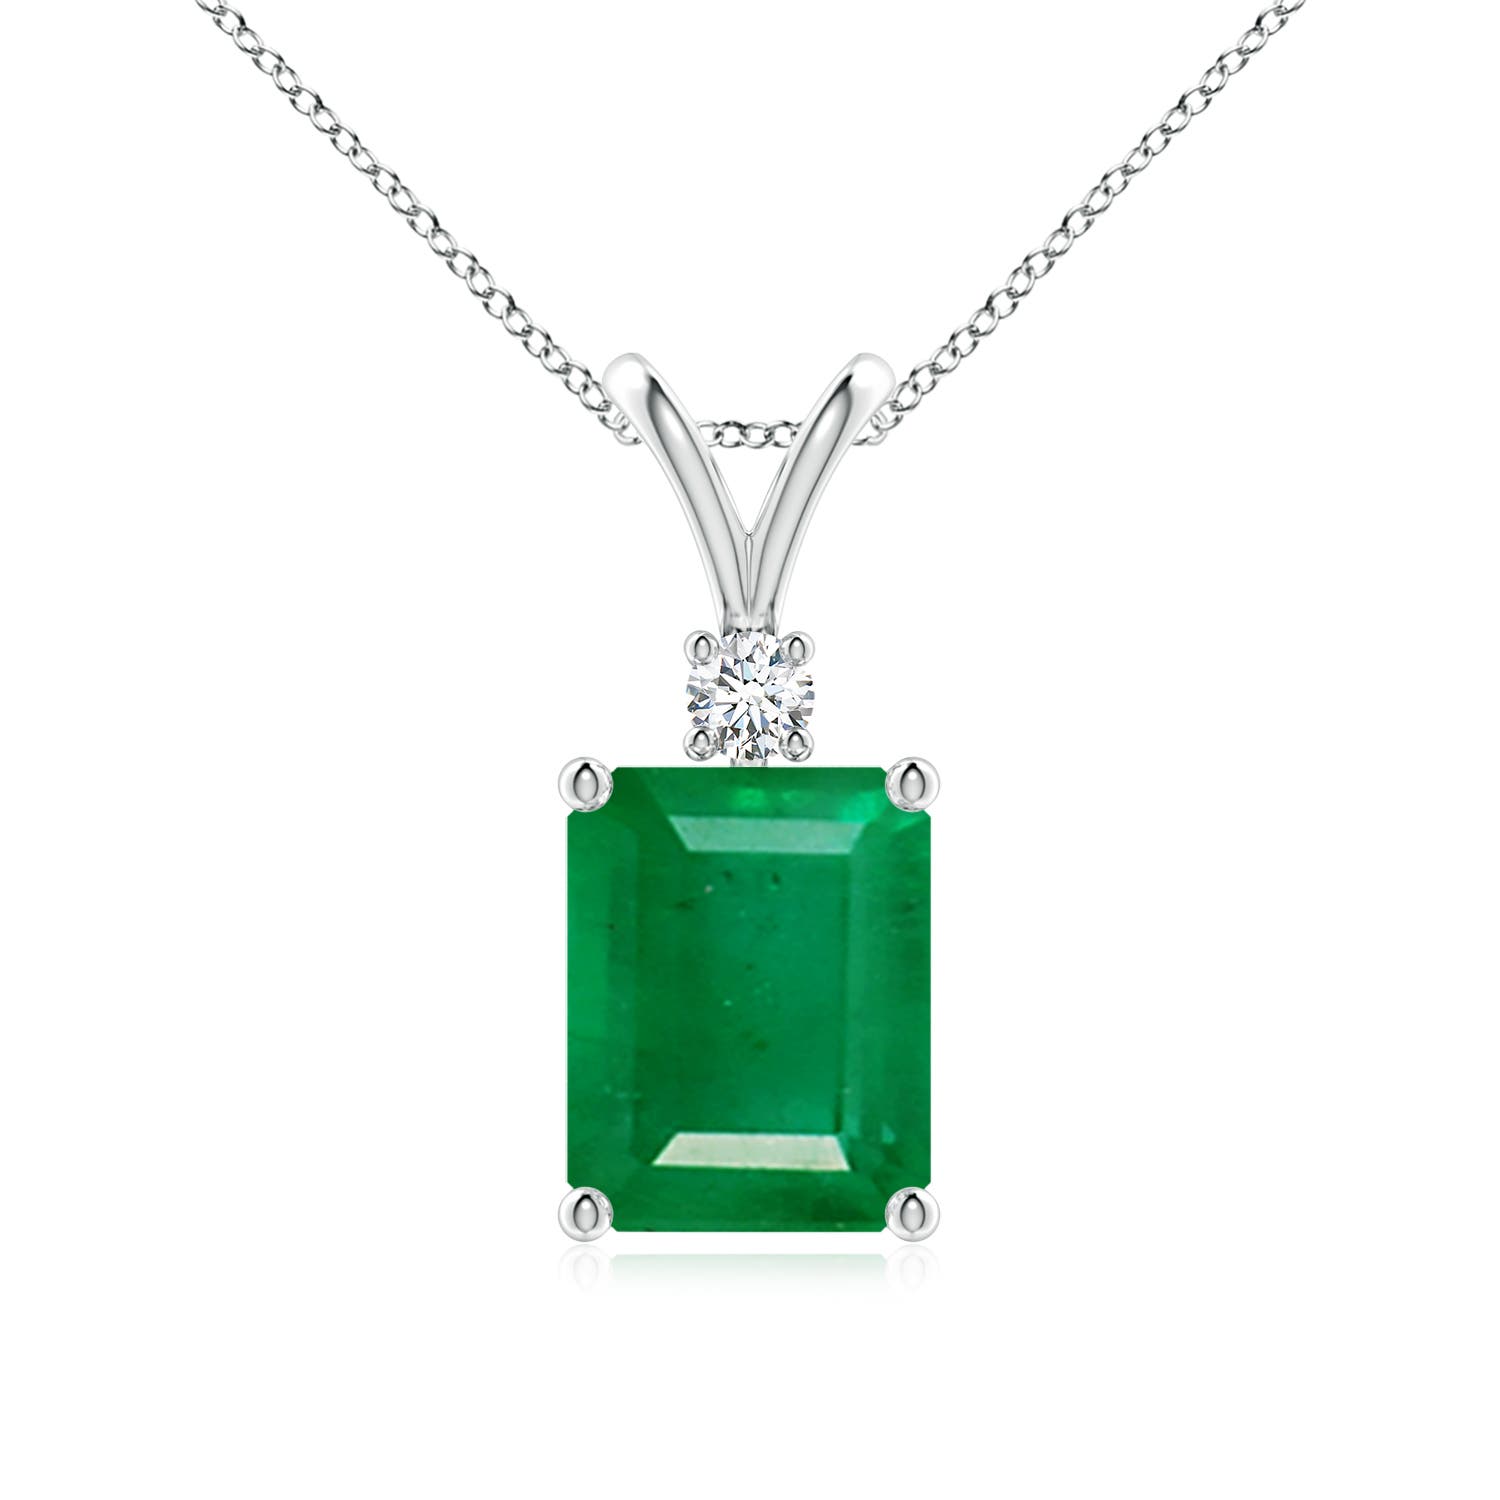 AA - Emerald / 2.32 CT / 14 KT White Gold